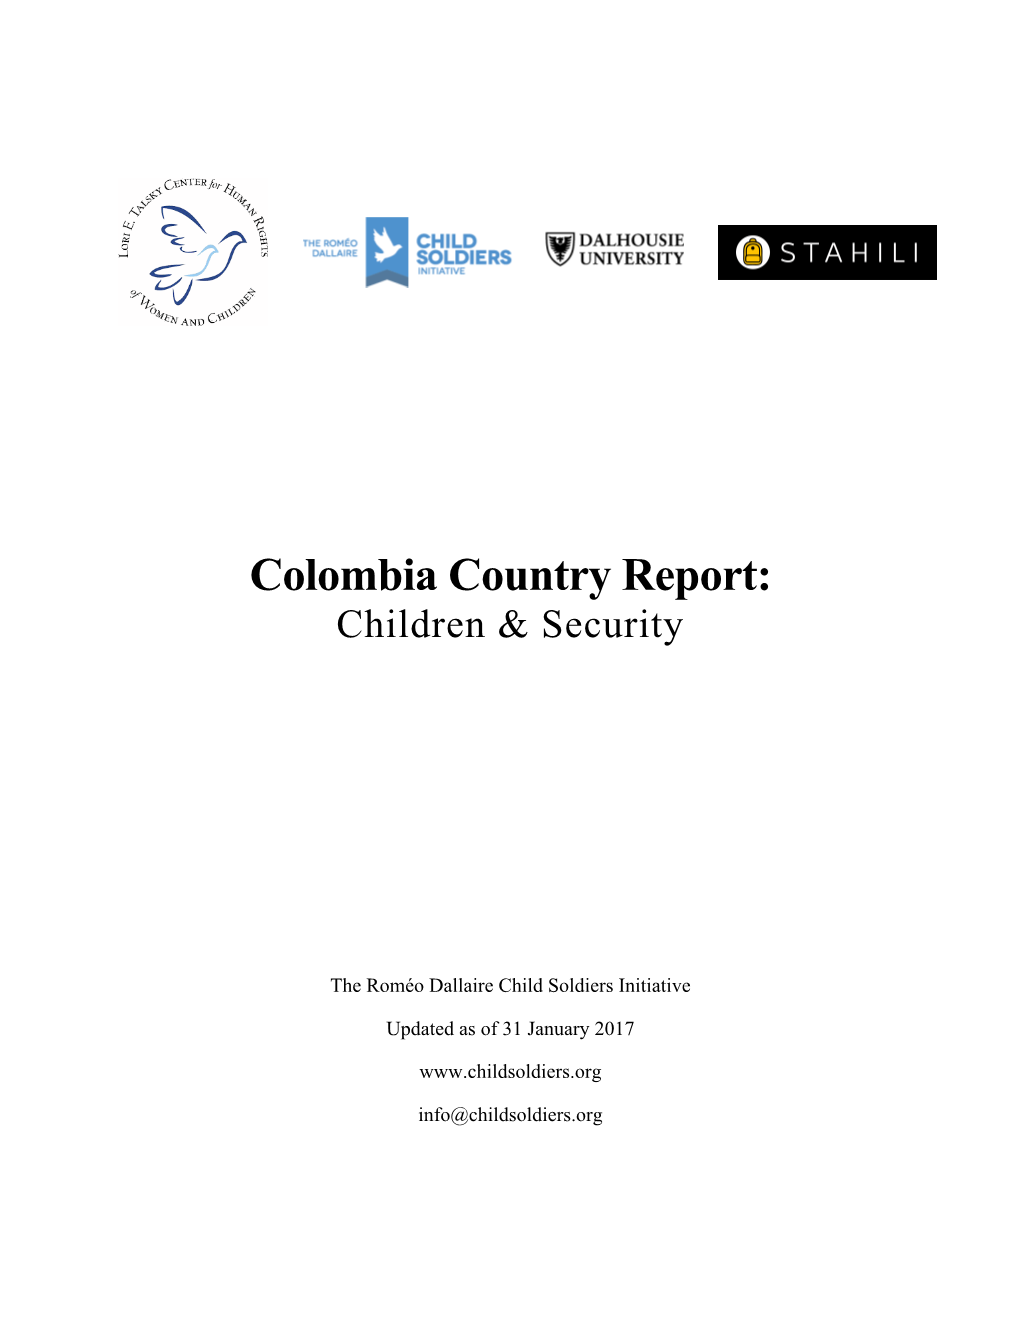 Colombia Country Report: Children & Security